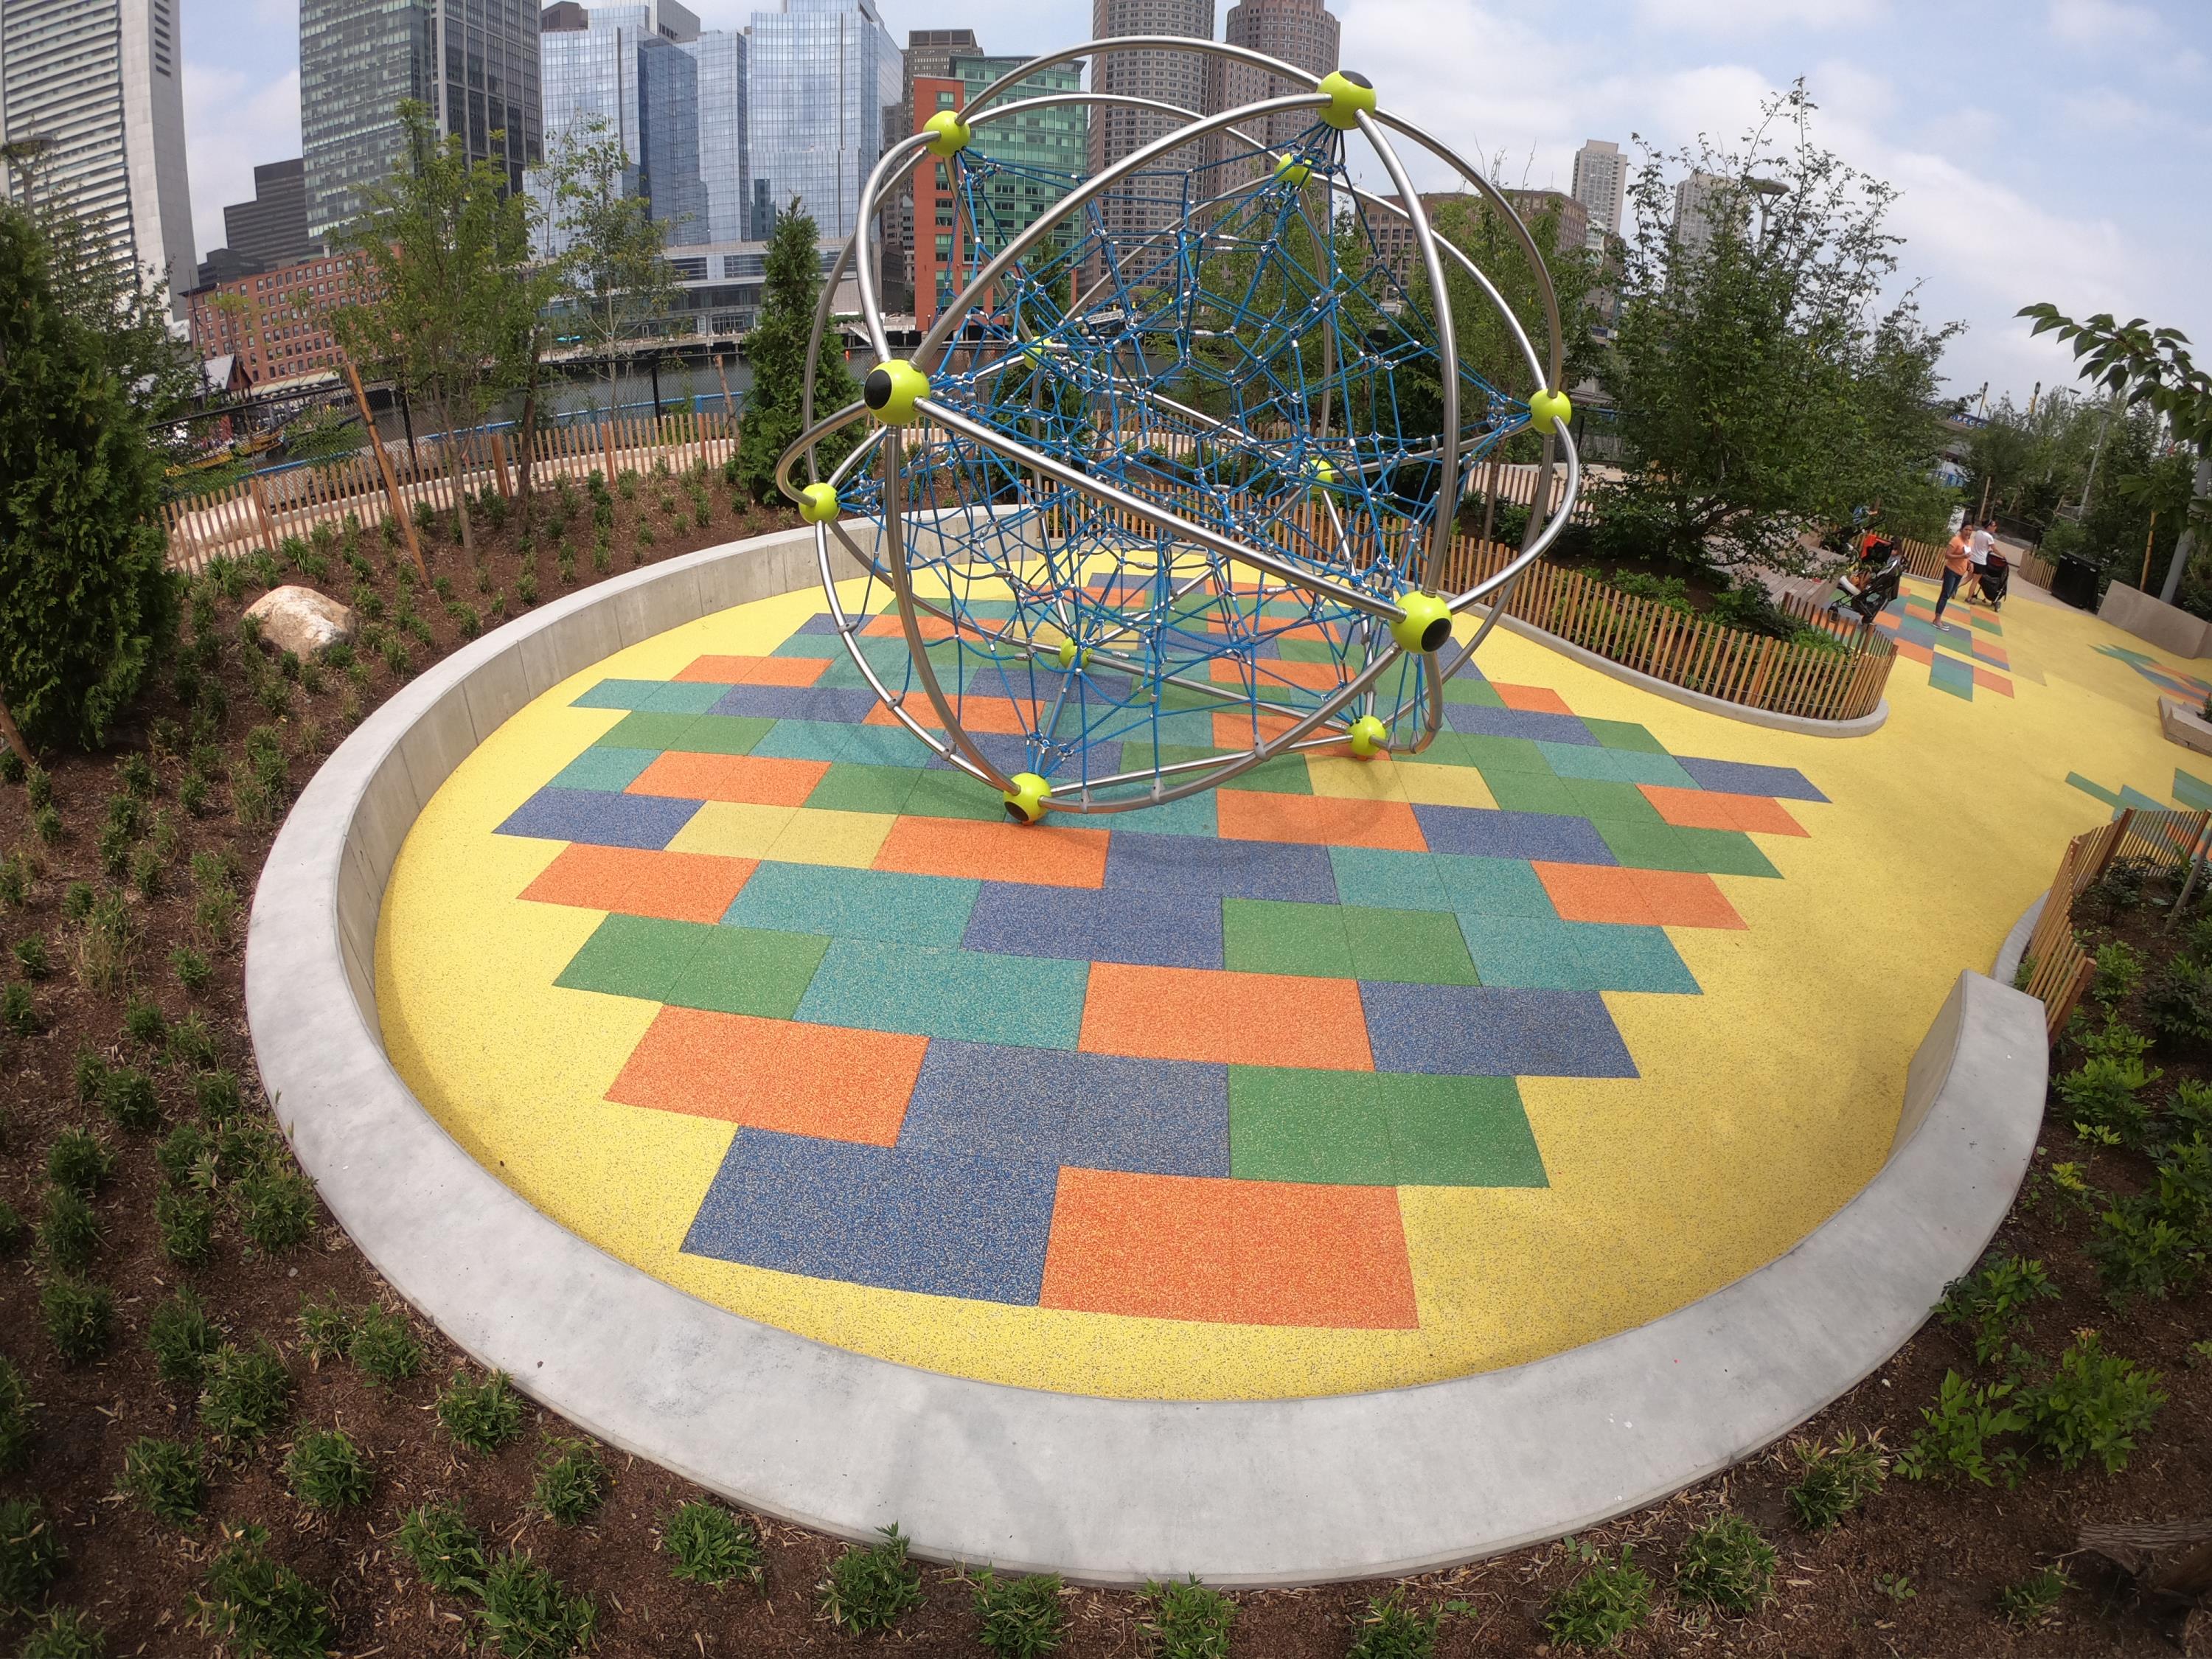 4" thick XL-Series used on this inner city park playground area